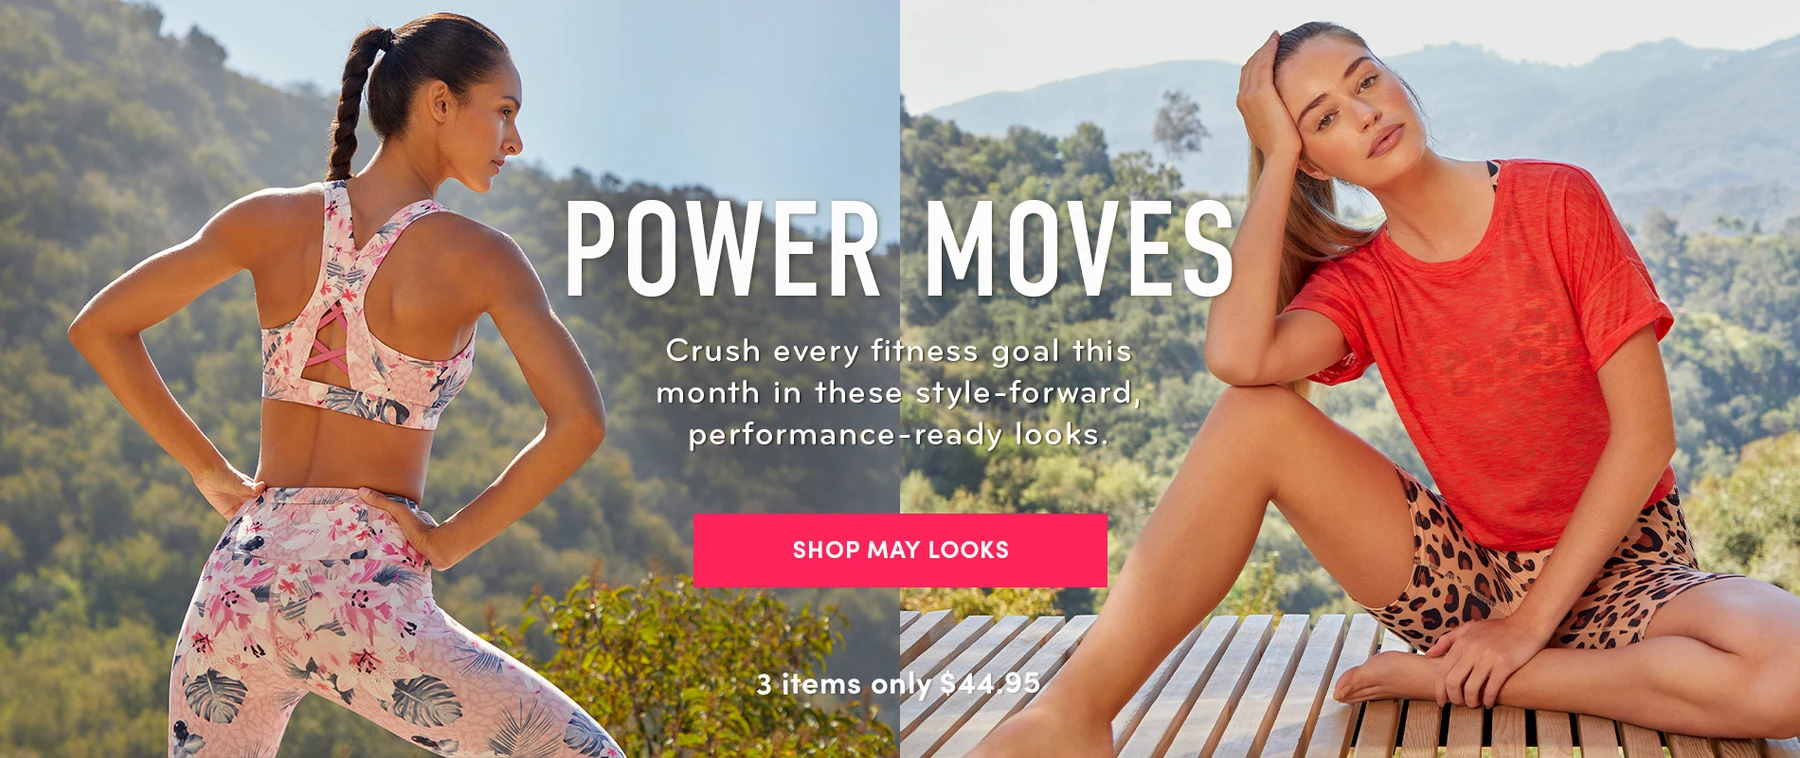 Fabletics Flash Sale - FREE Leggings With Purchase!